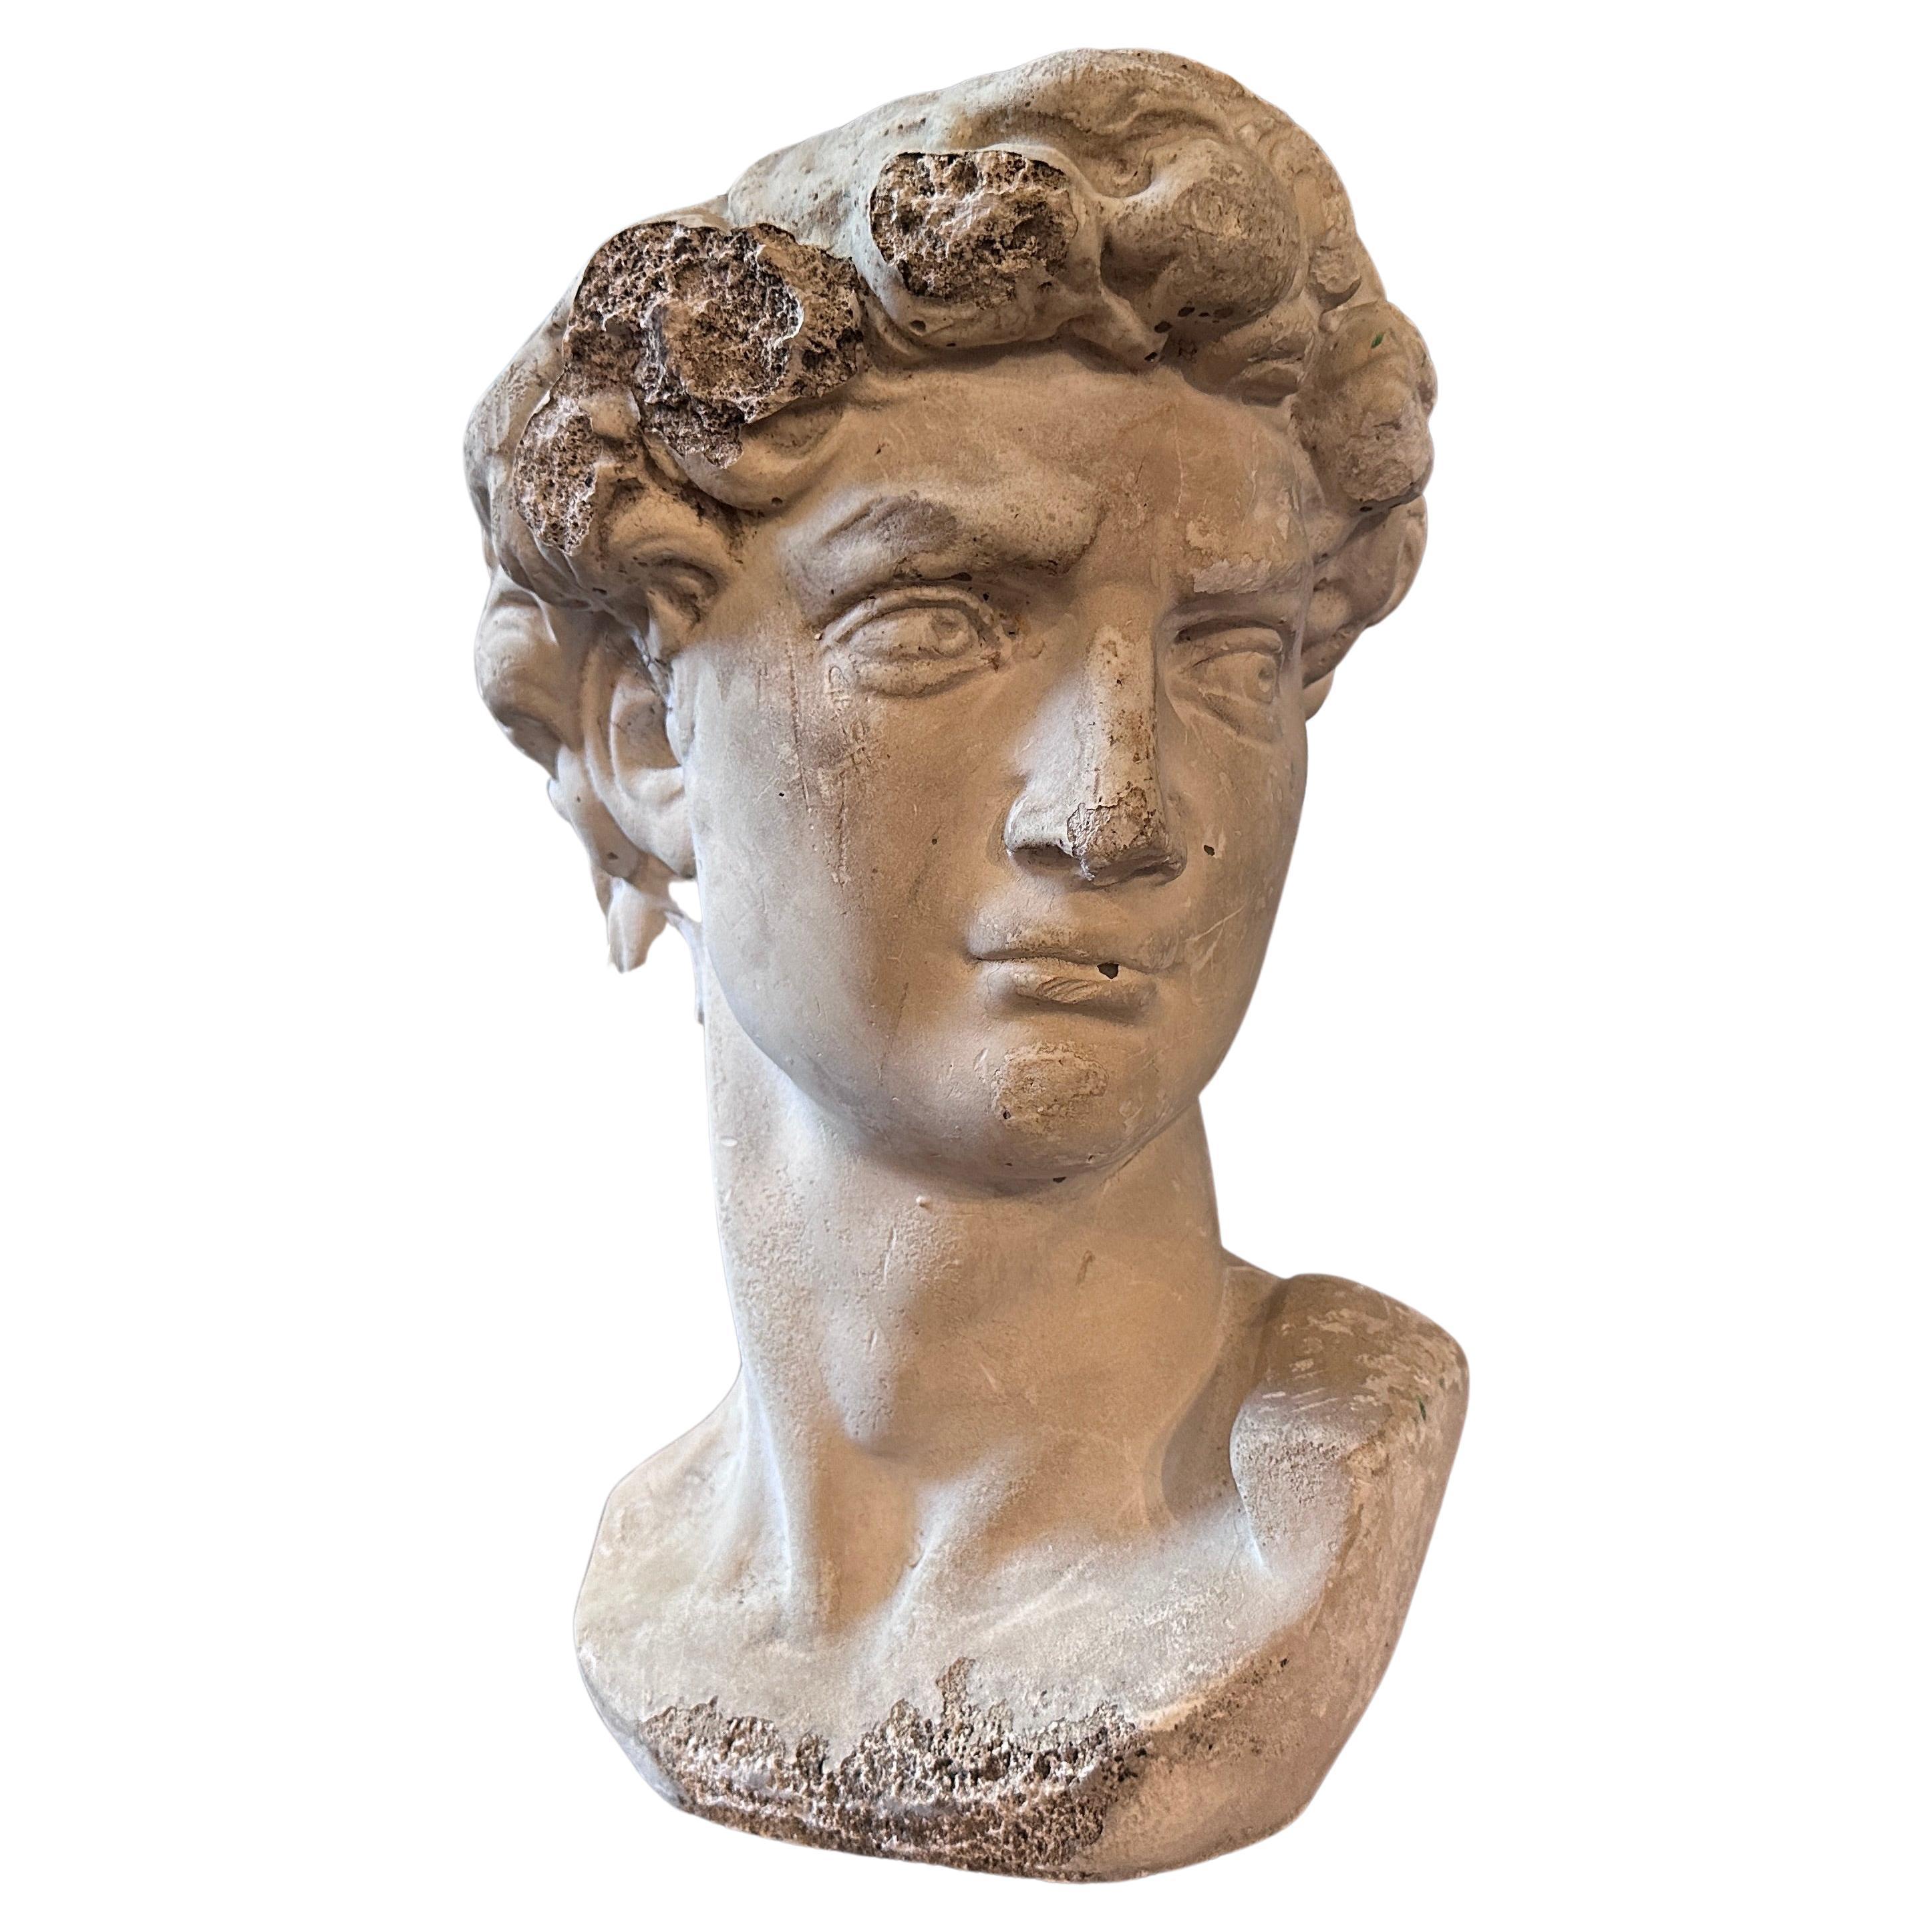 Early 20th Century Plaster Sculpture of the Bust of David by Michelangelo